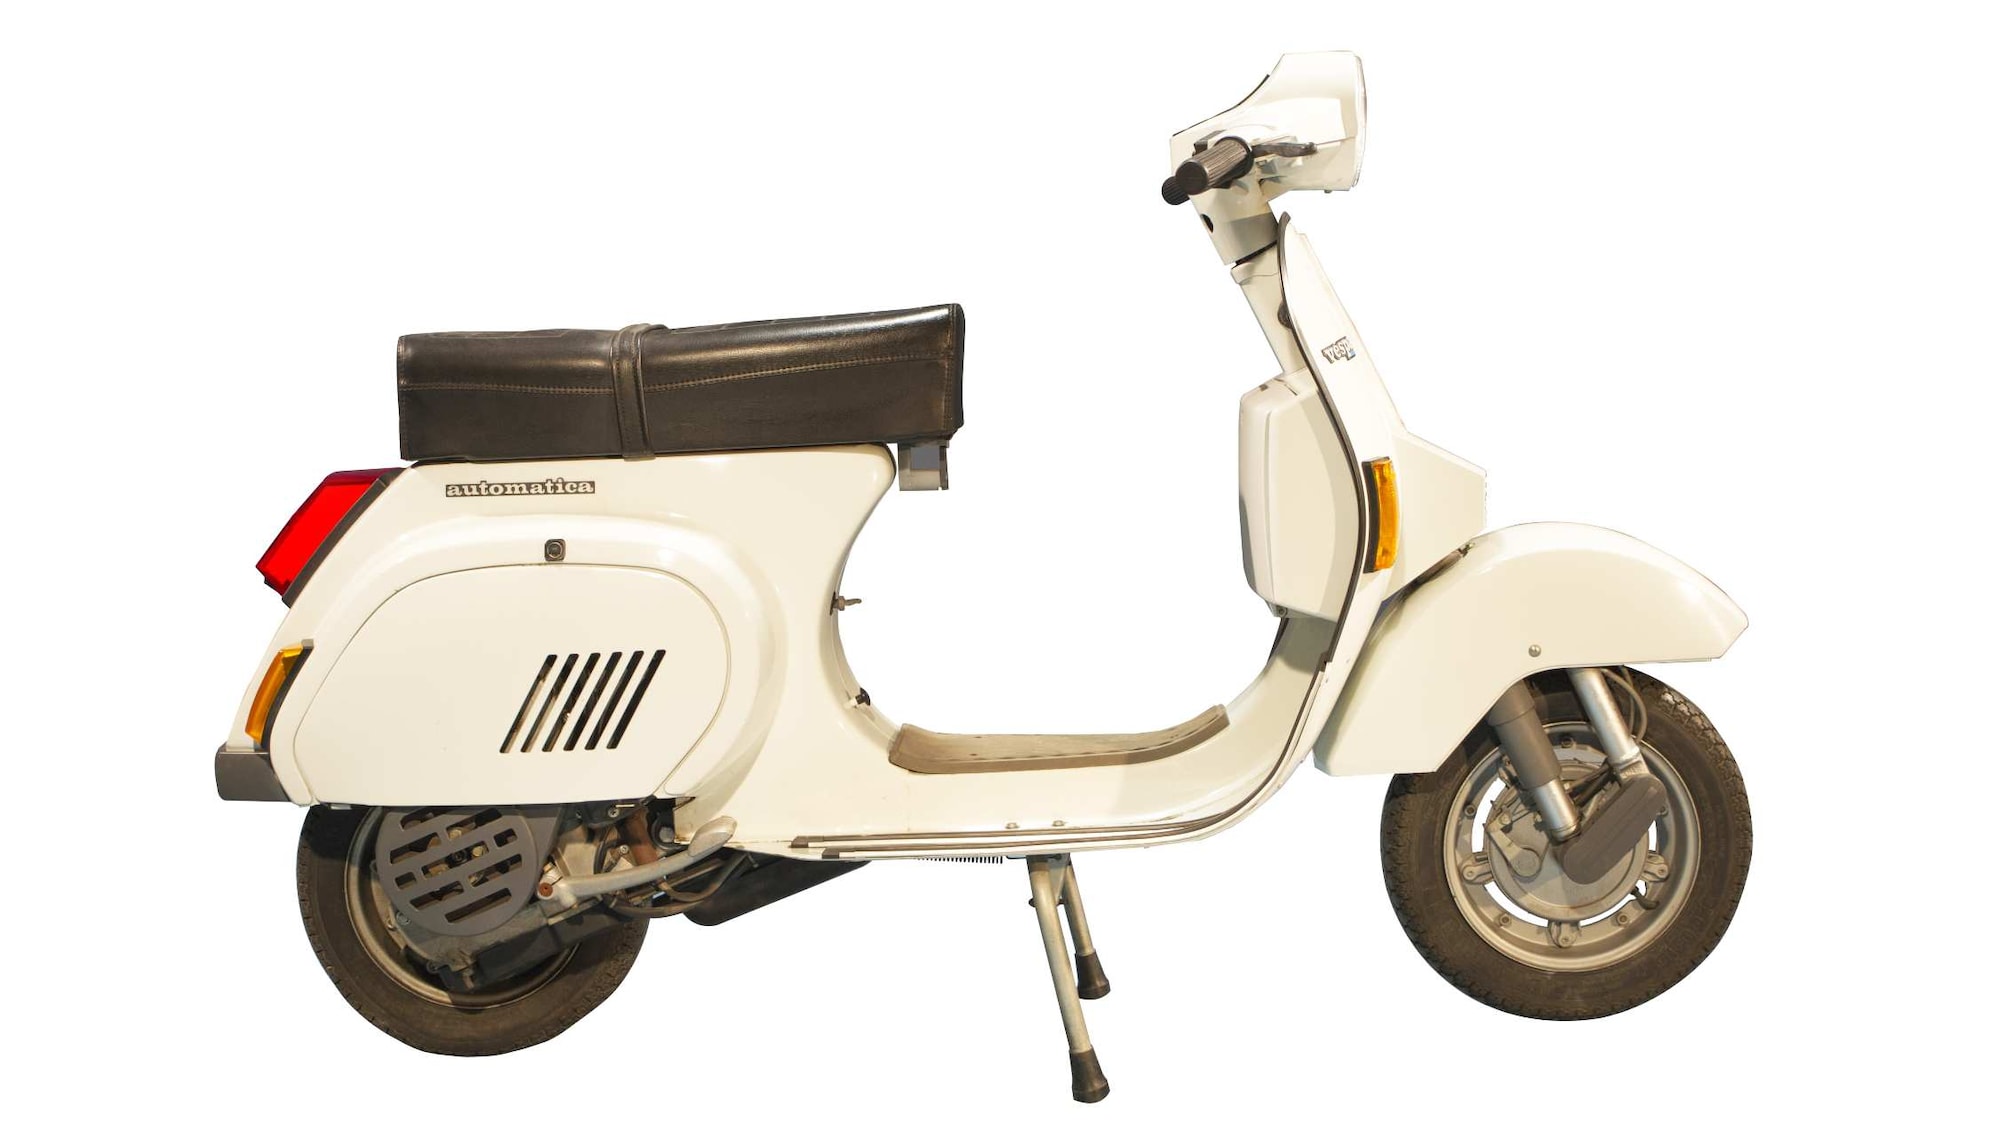 The Vespa 125 PK was the first Vespa with an automatic transmission and electric start. Image: Piaggio